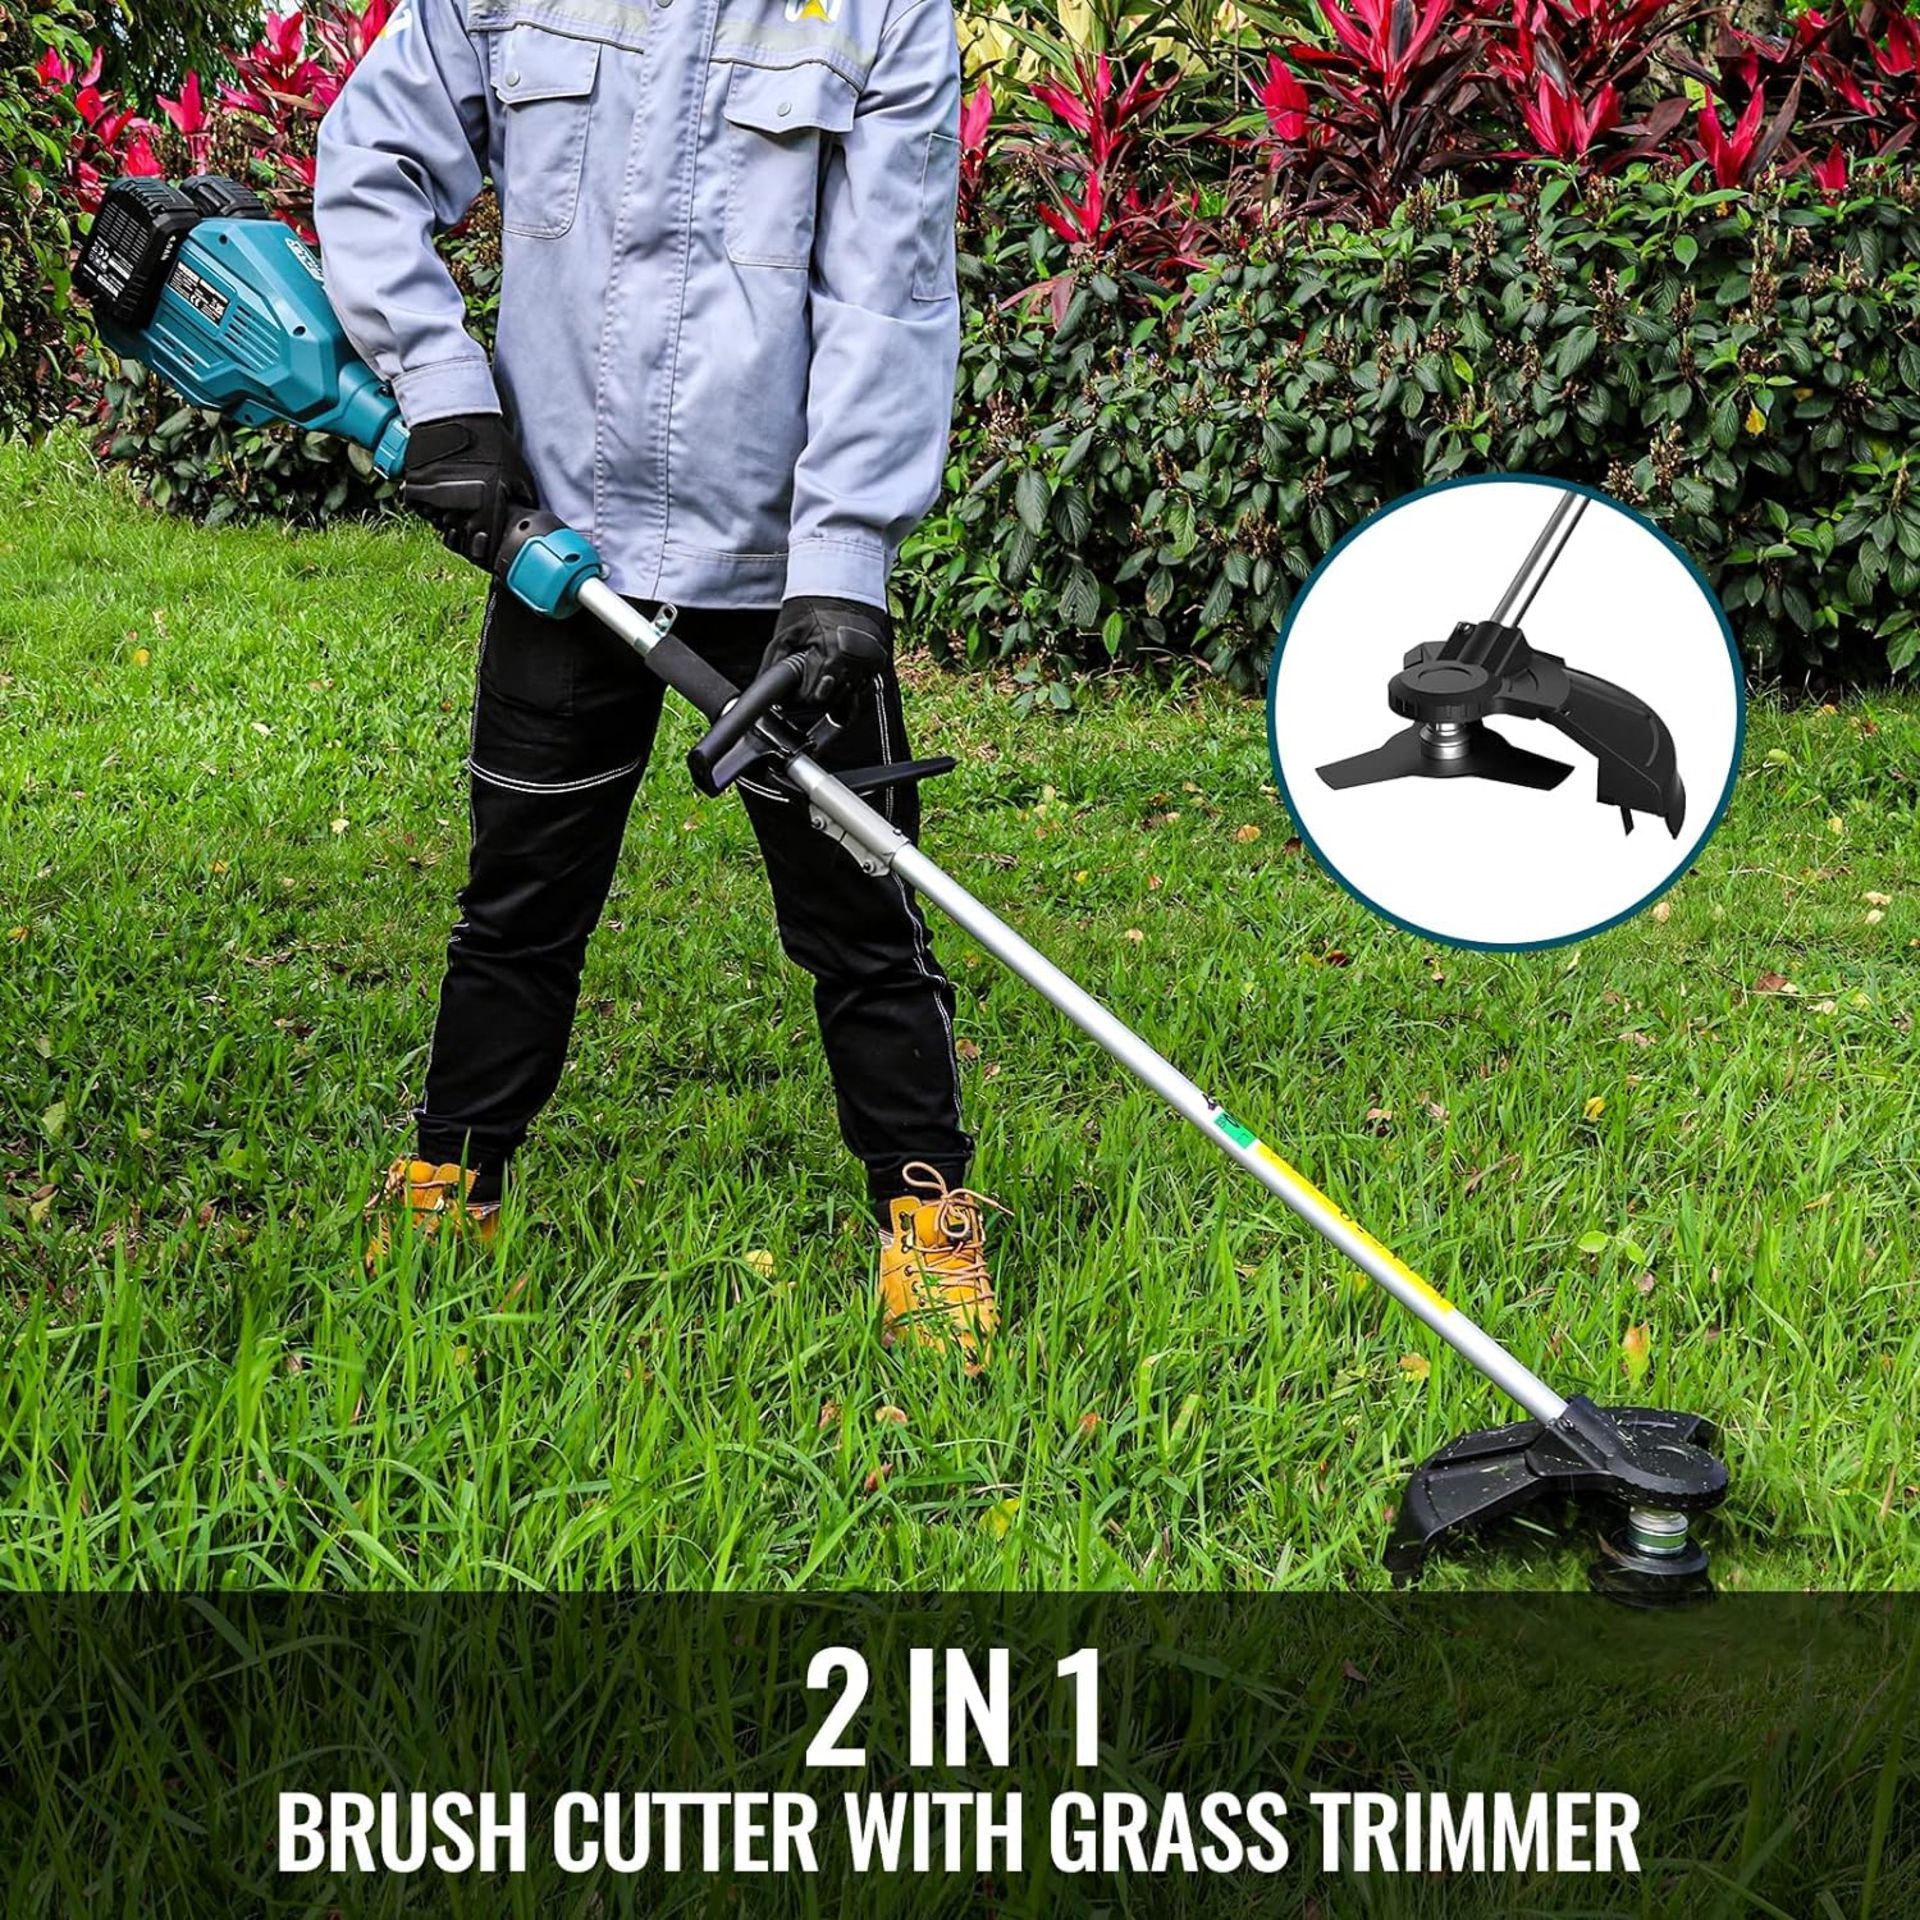 NEW & BOXED WESCO 36V Cordless 2-in-1 Brush Cutter & String Trimmer. RRP £169.99 EACH. It can not - Image 6 of 7